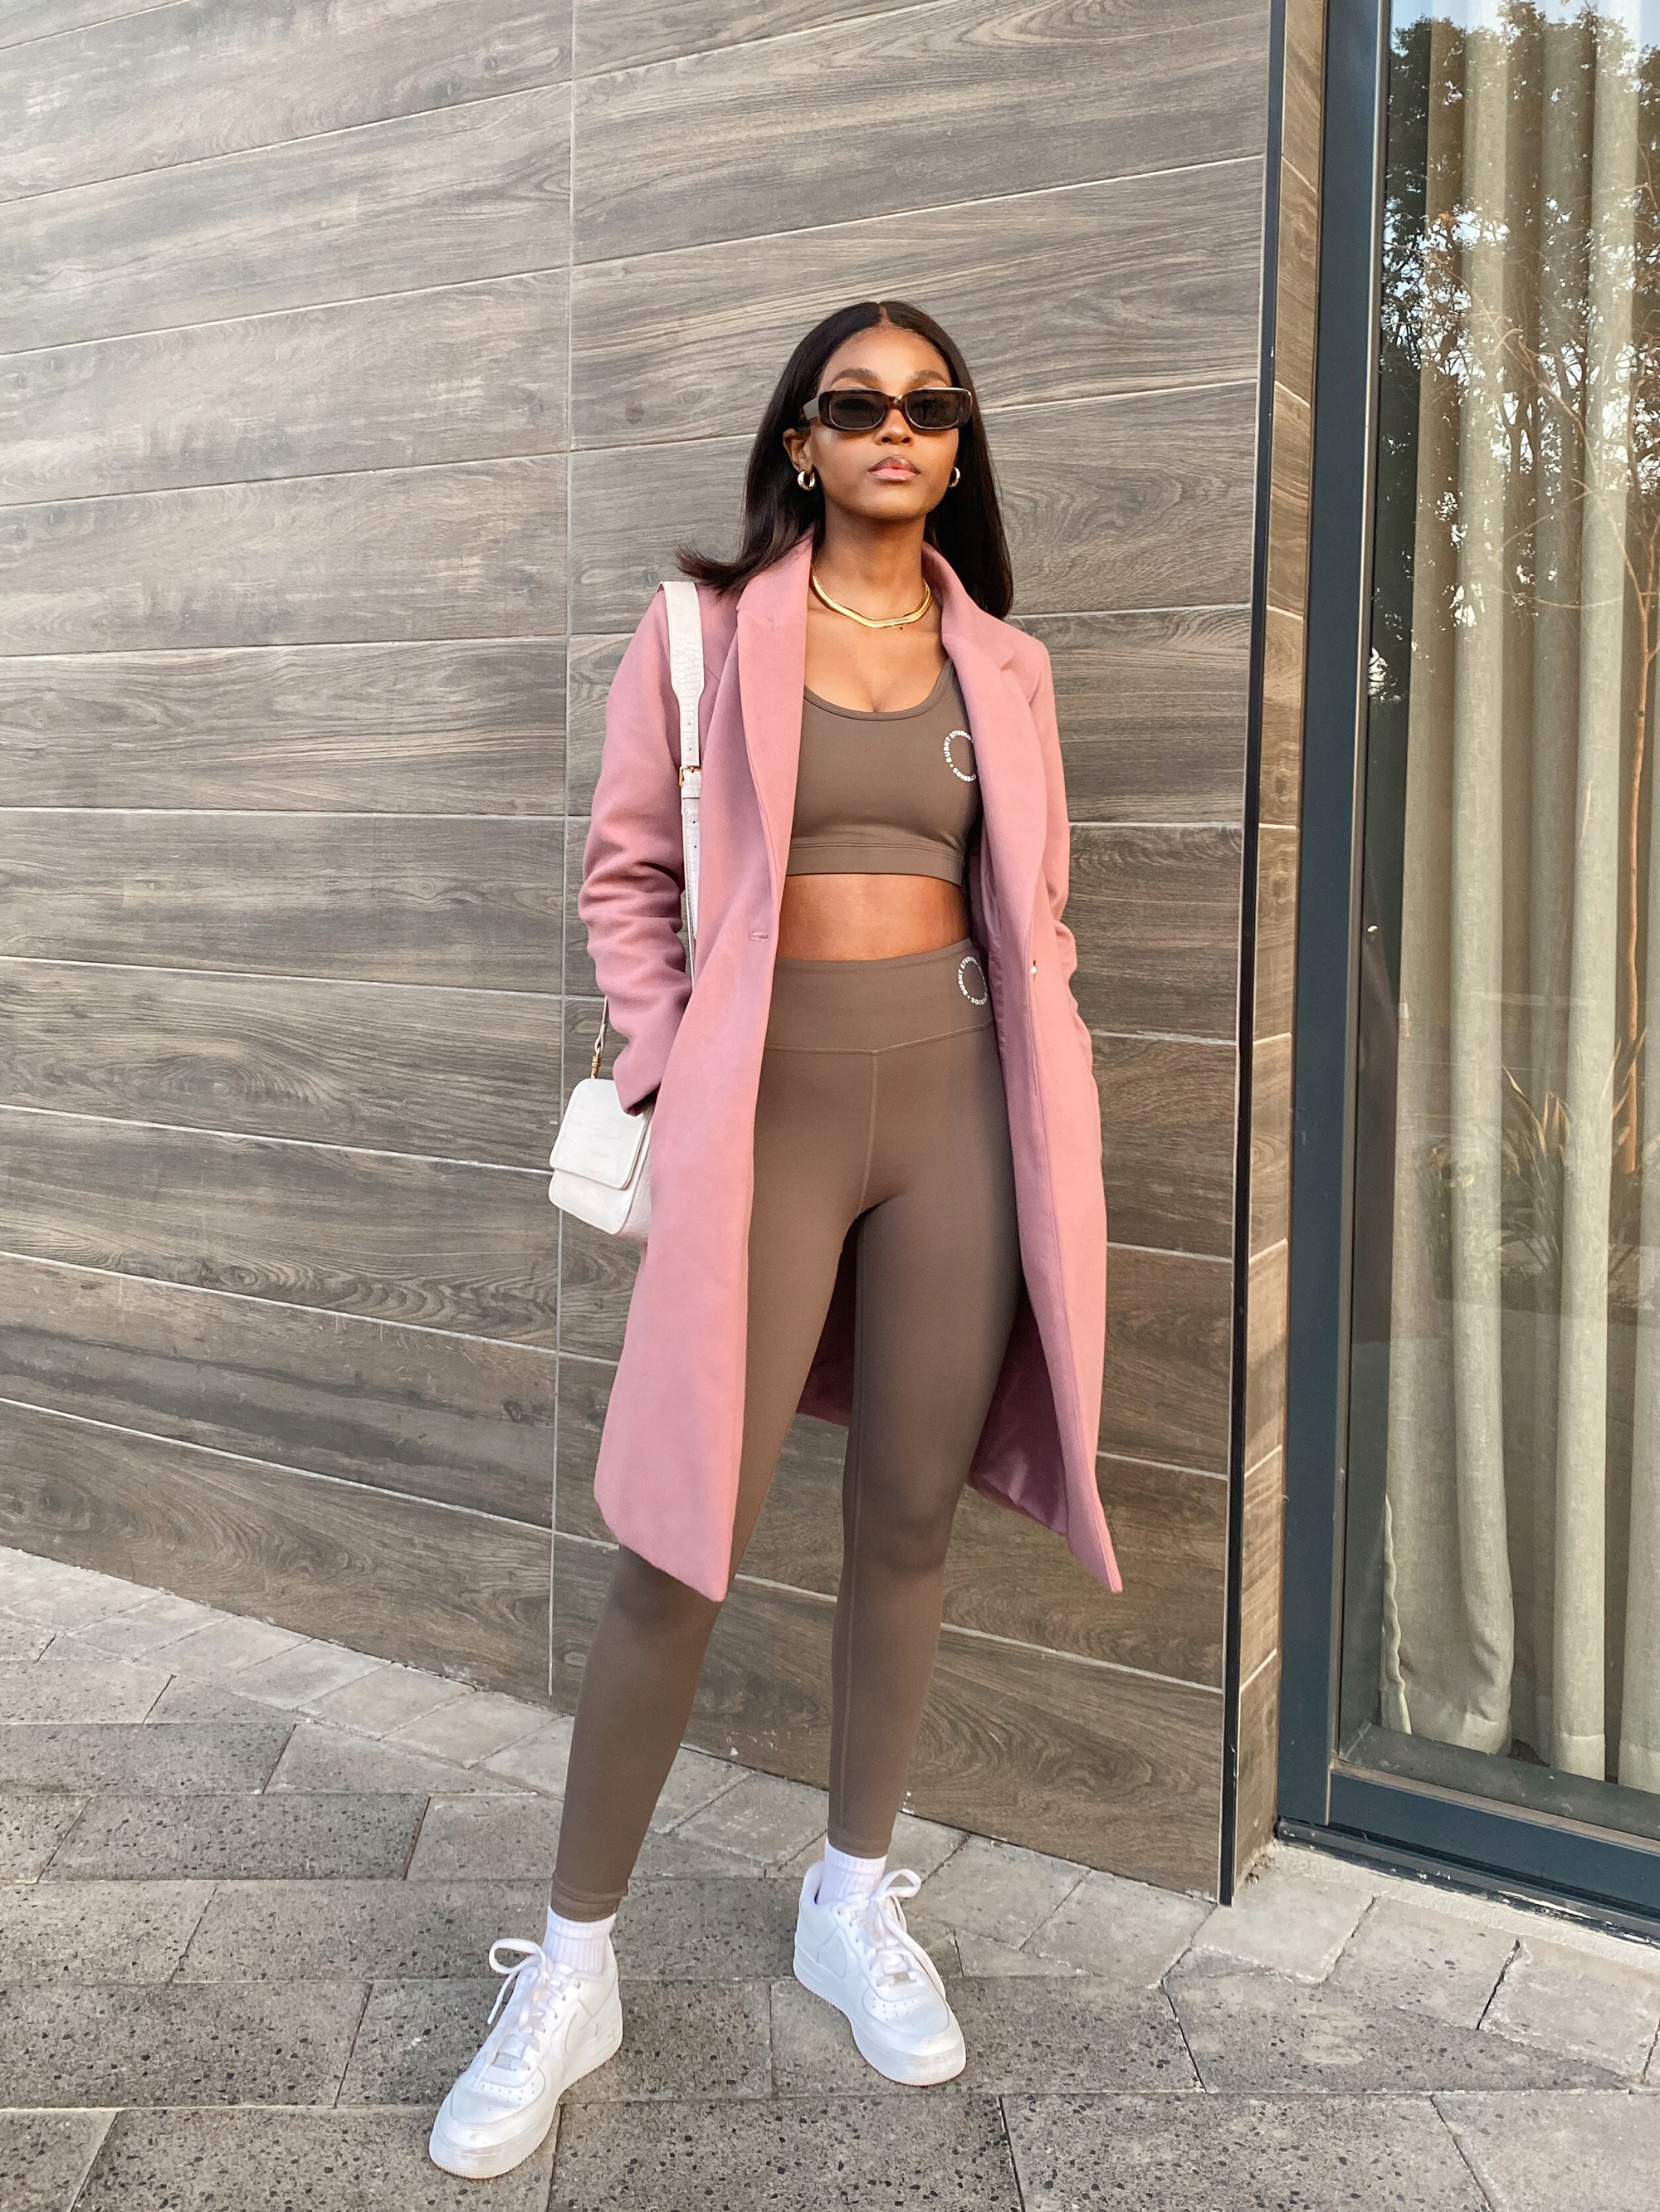 mmaketi langa, woman in activewear, athleisure, style, fashion, the suite, the suite edit, brutal fruit